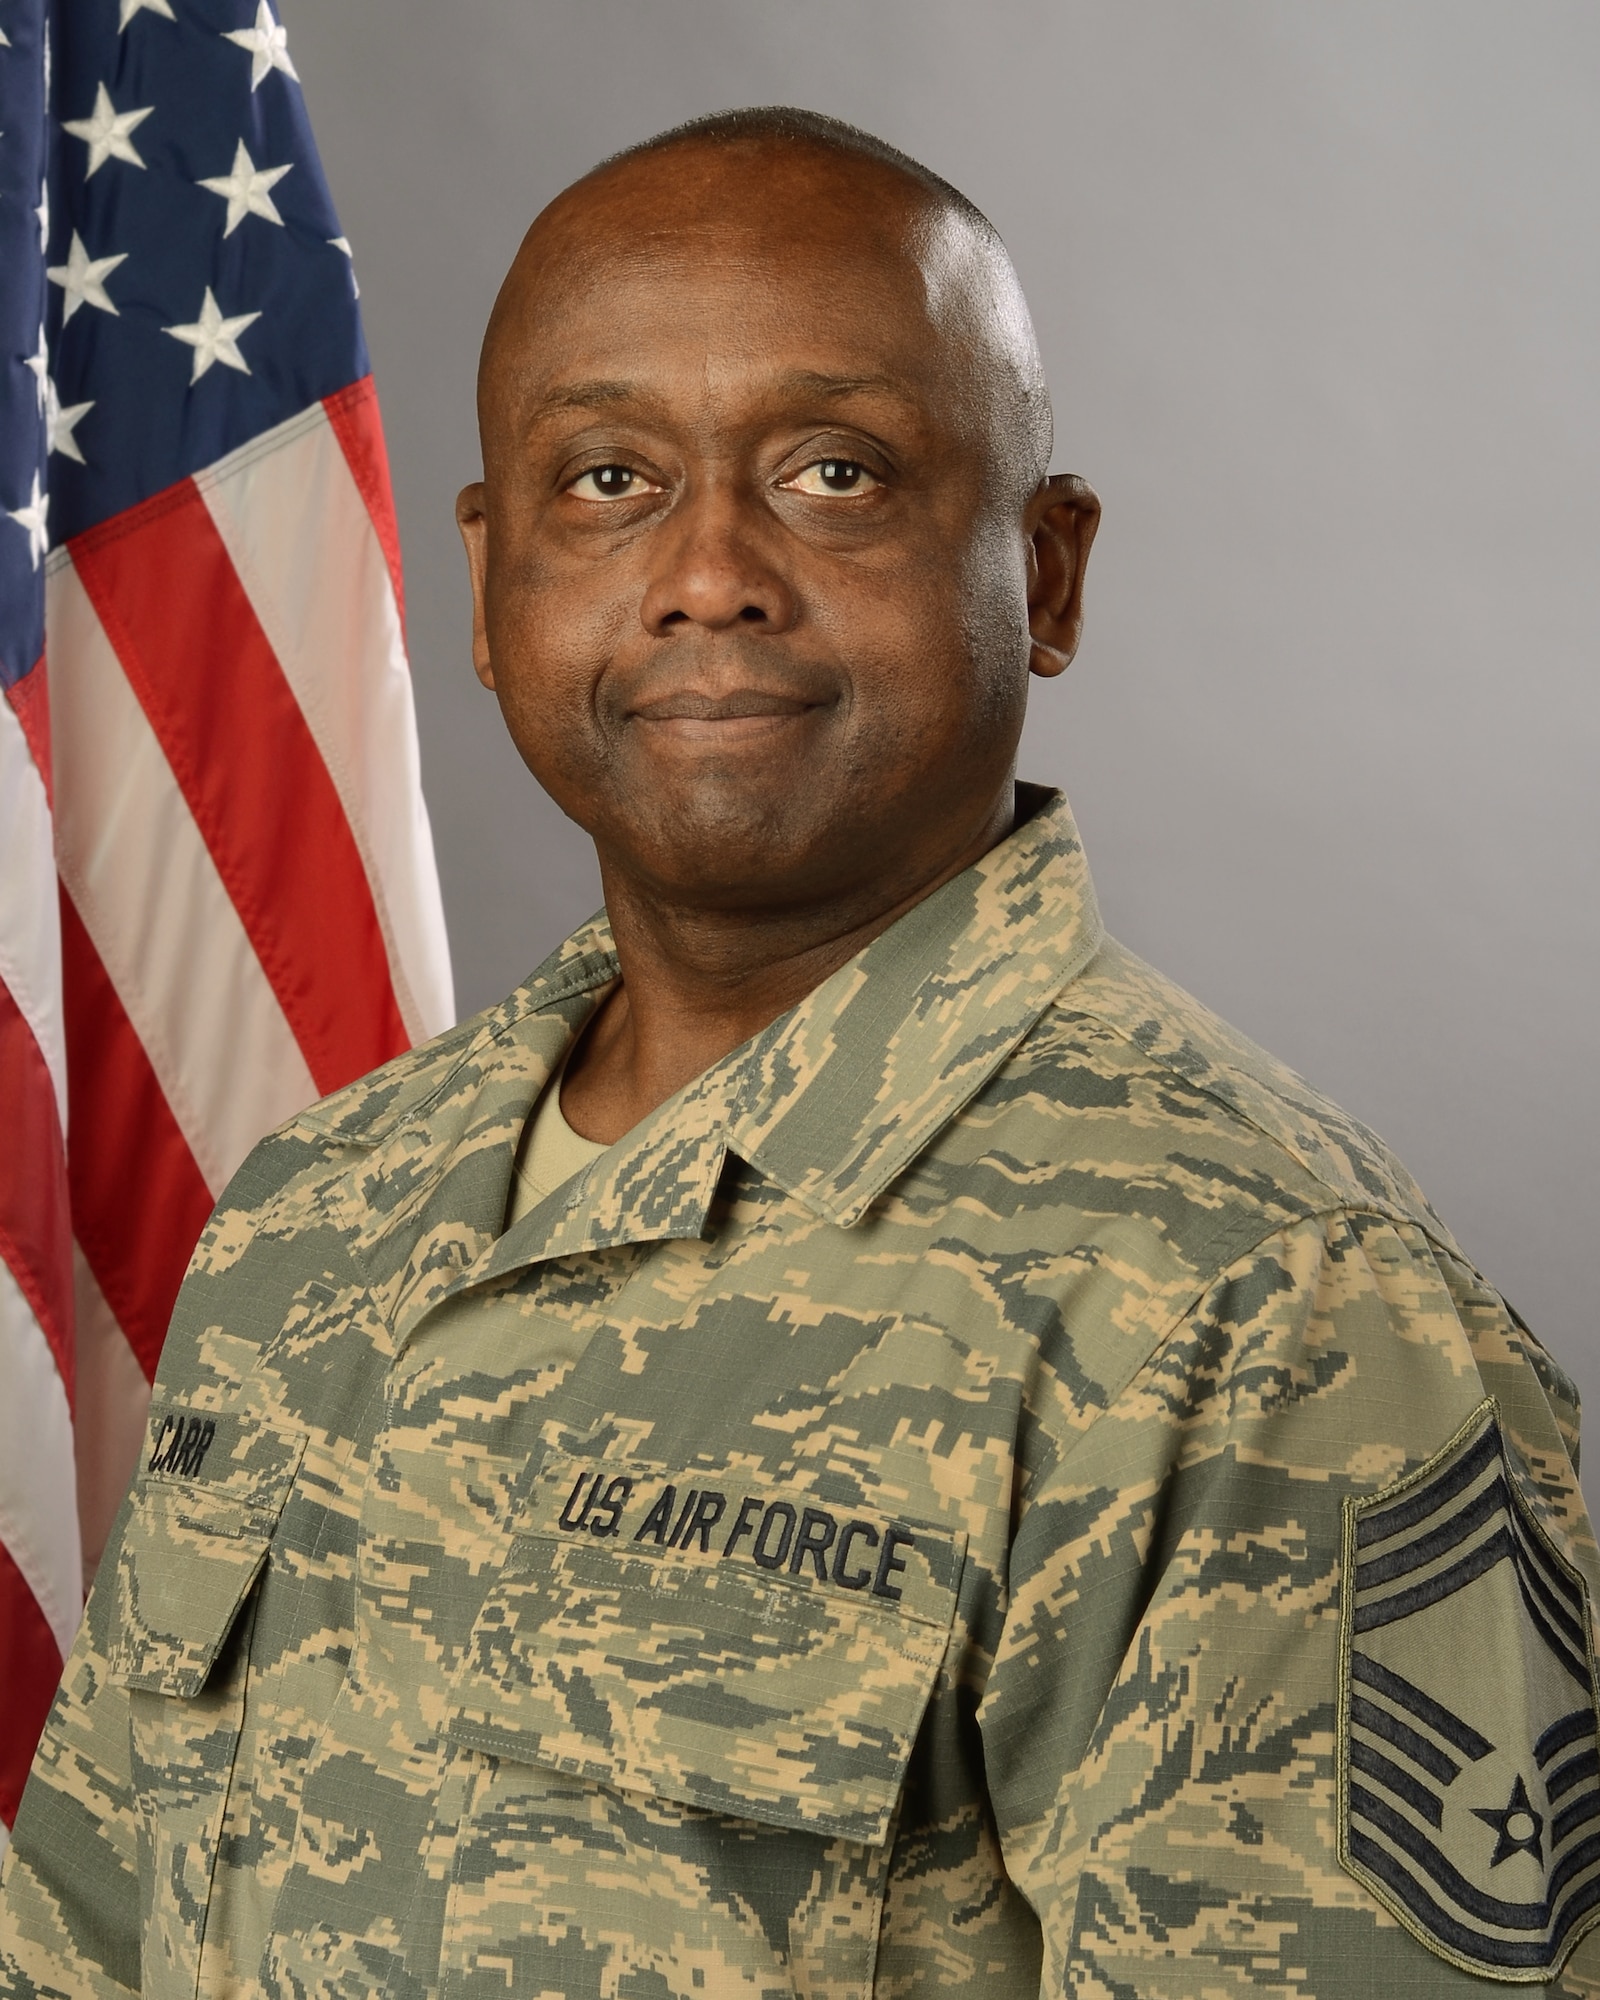 Portrait of U.S. Air Force Chief Master Sgt. Isaac Carr, assigned to the 169th Mission Support Group at McEntire Joint National Guard Base, S.C., February 7, 2020.